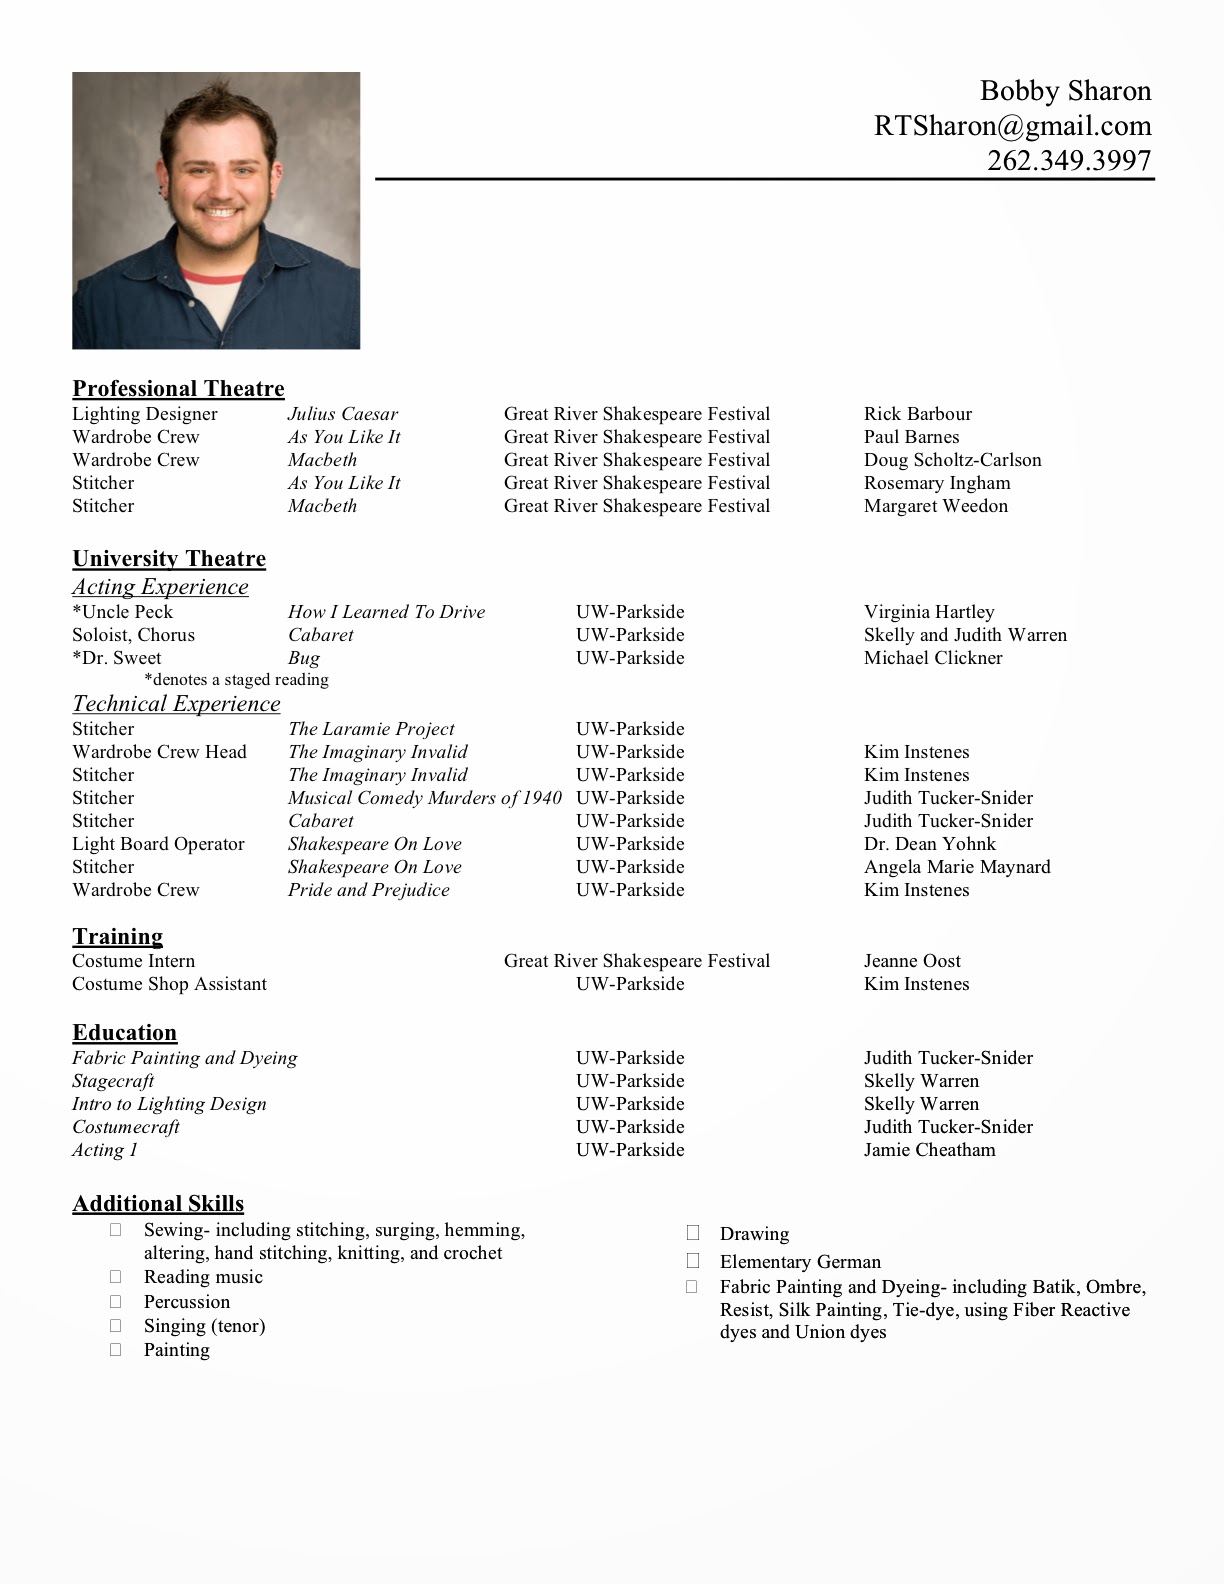 Resume Format Examples